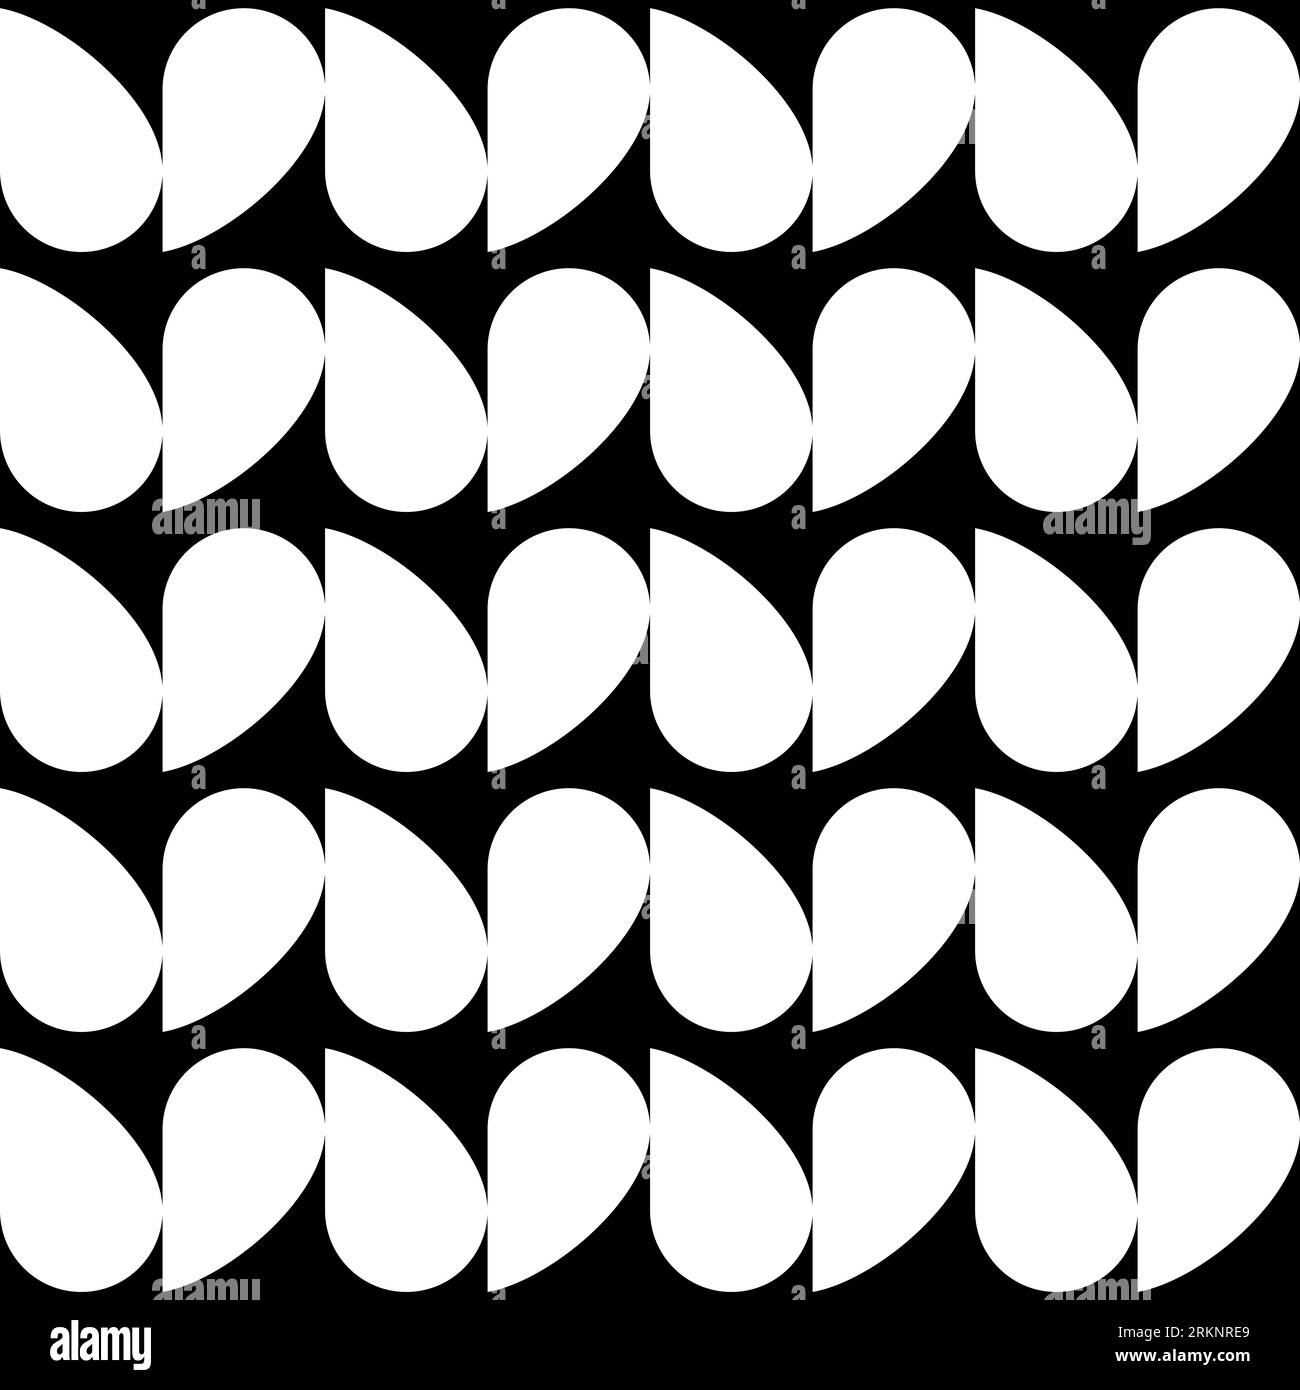 Seamless pattern with geometric motifs in black and white Stock Photo